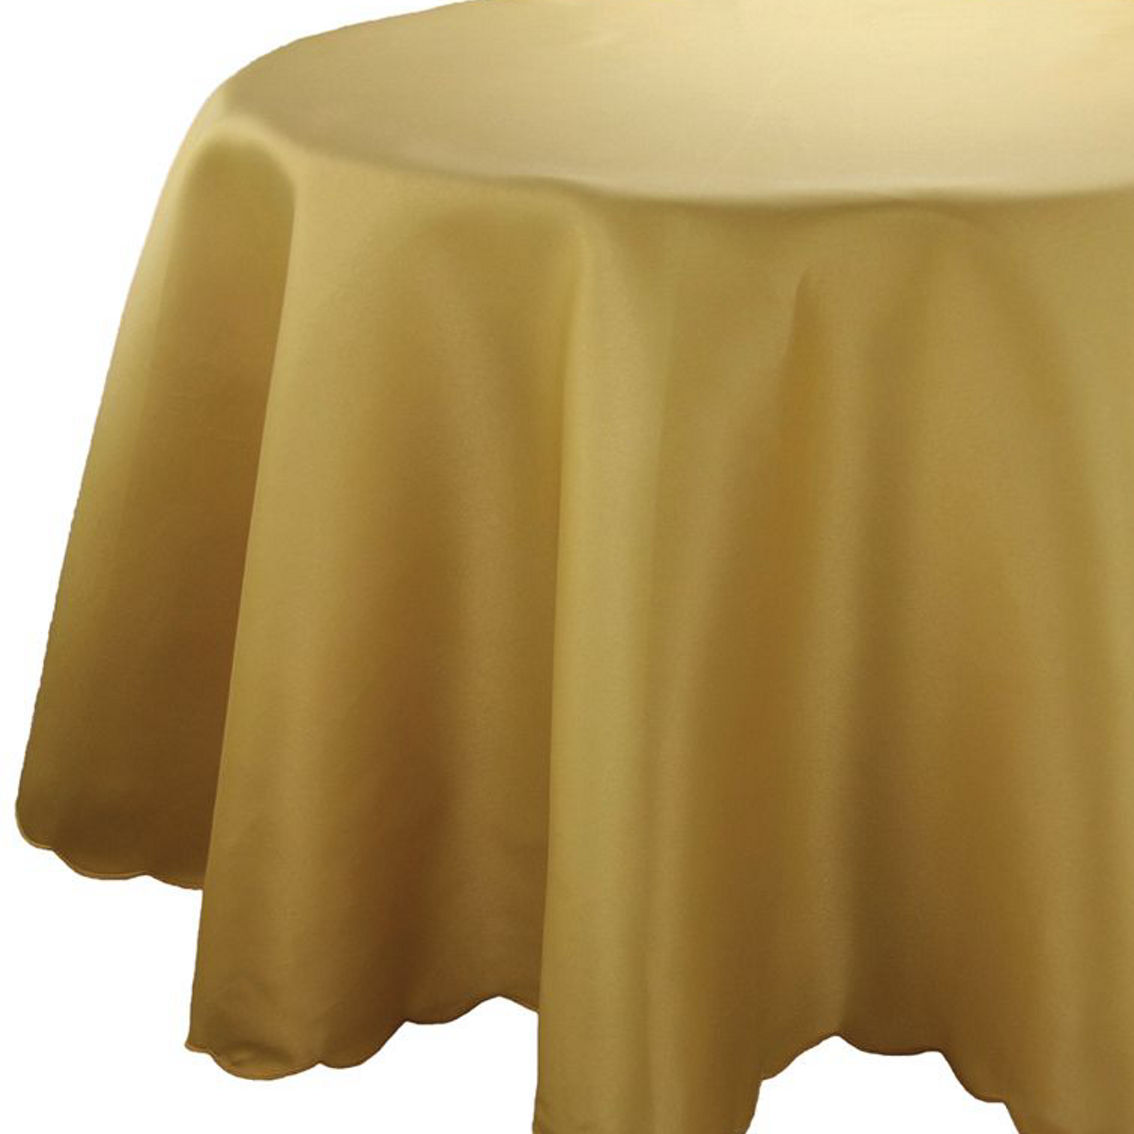 Xia Home Fashions, Samantha 90-Inch Round Tablecloth Gold - Image 2 of 2